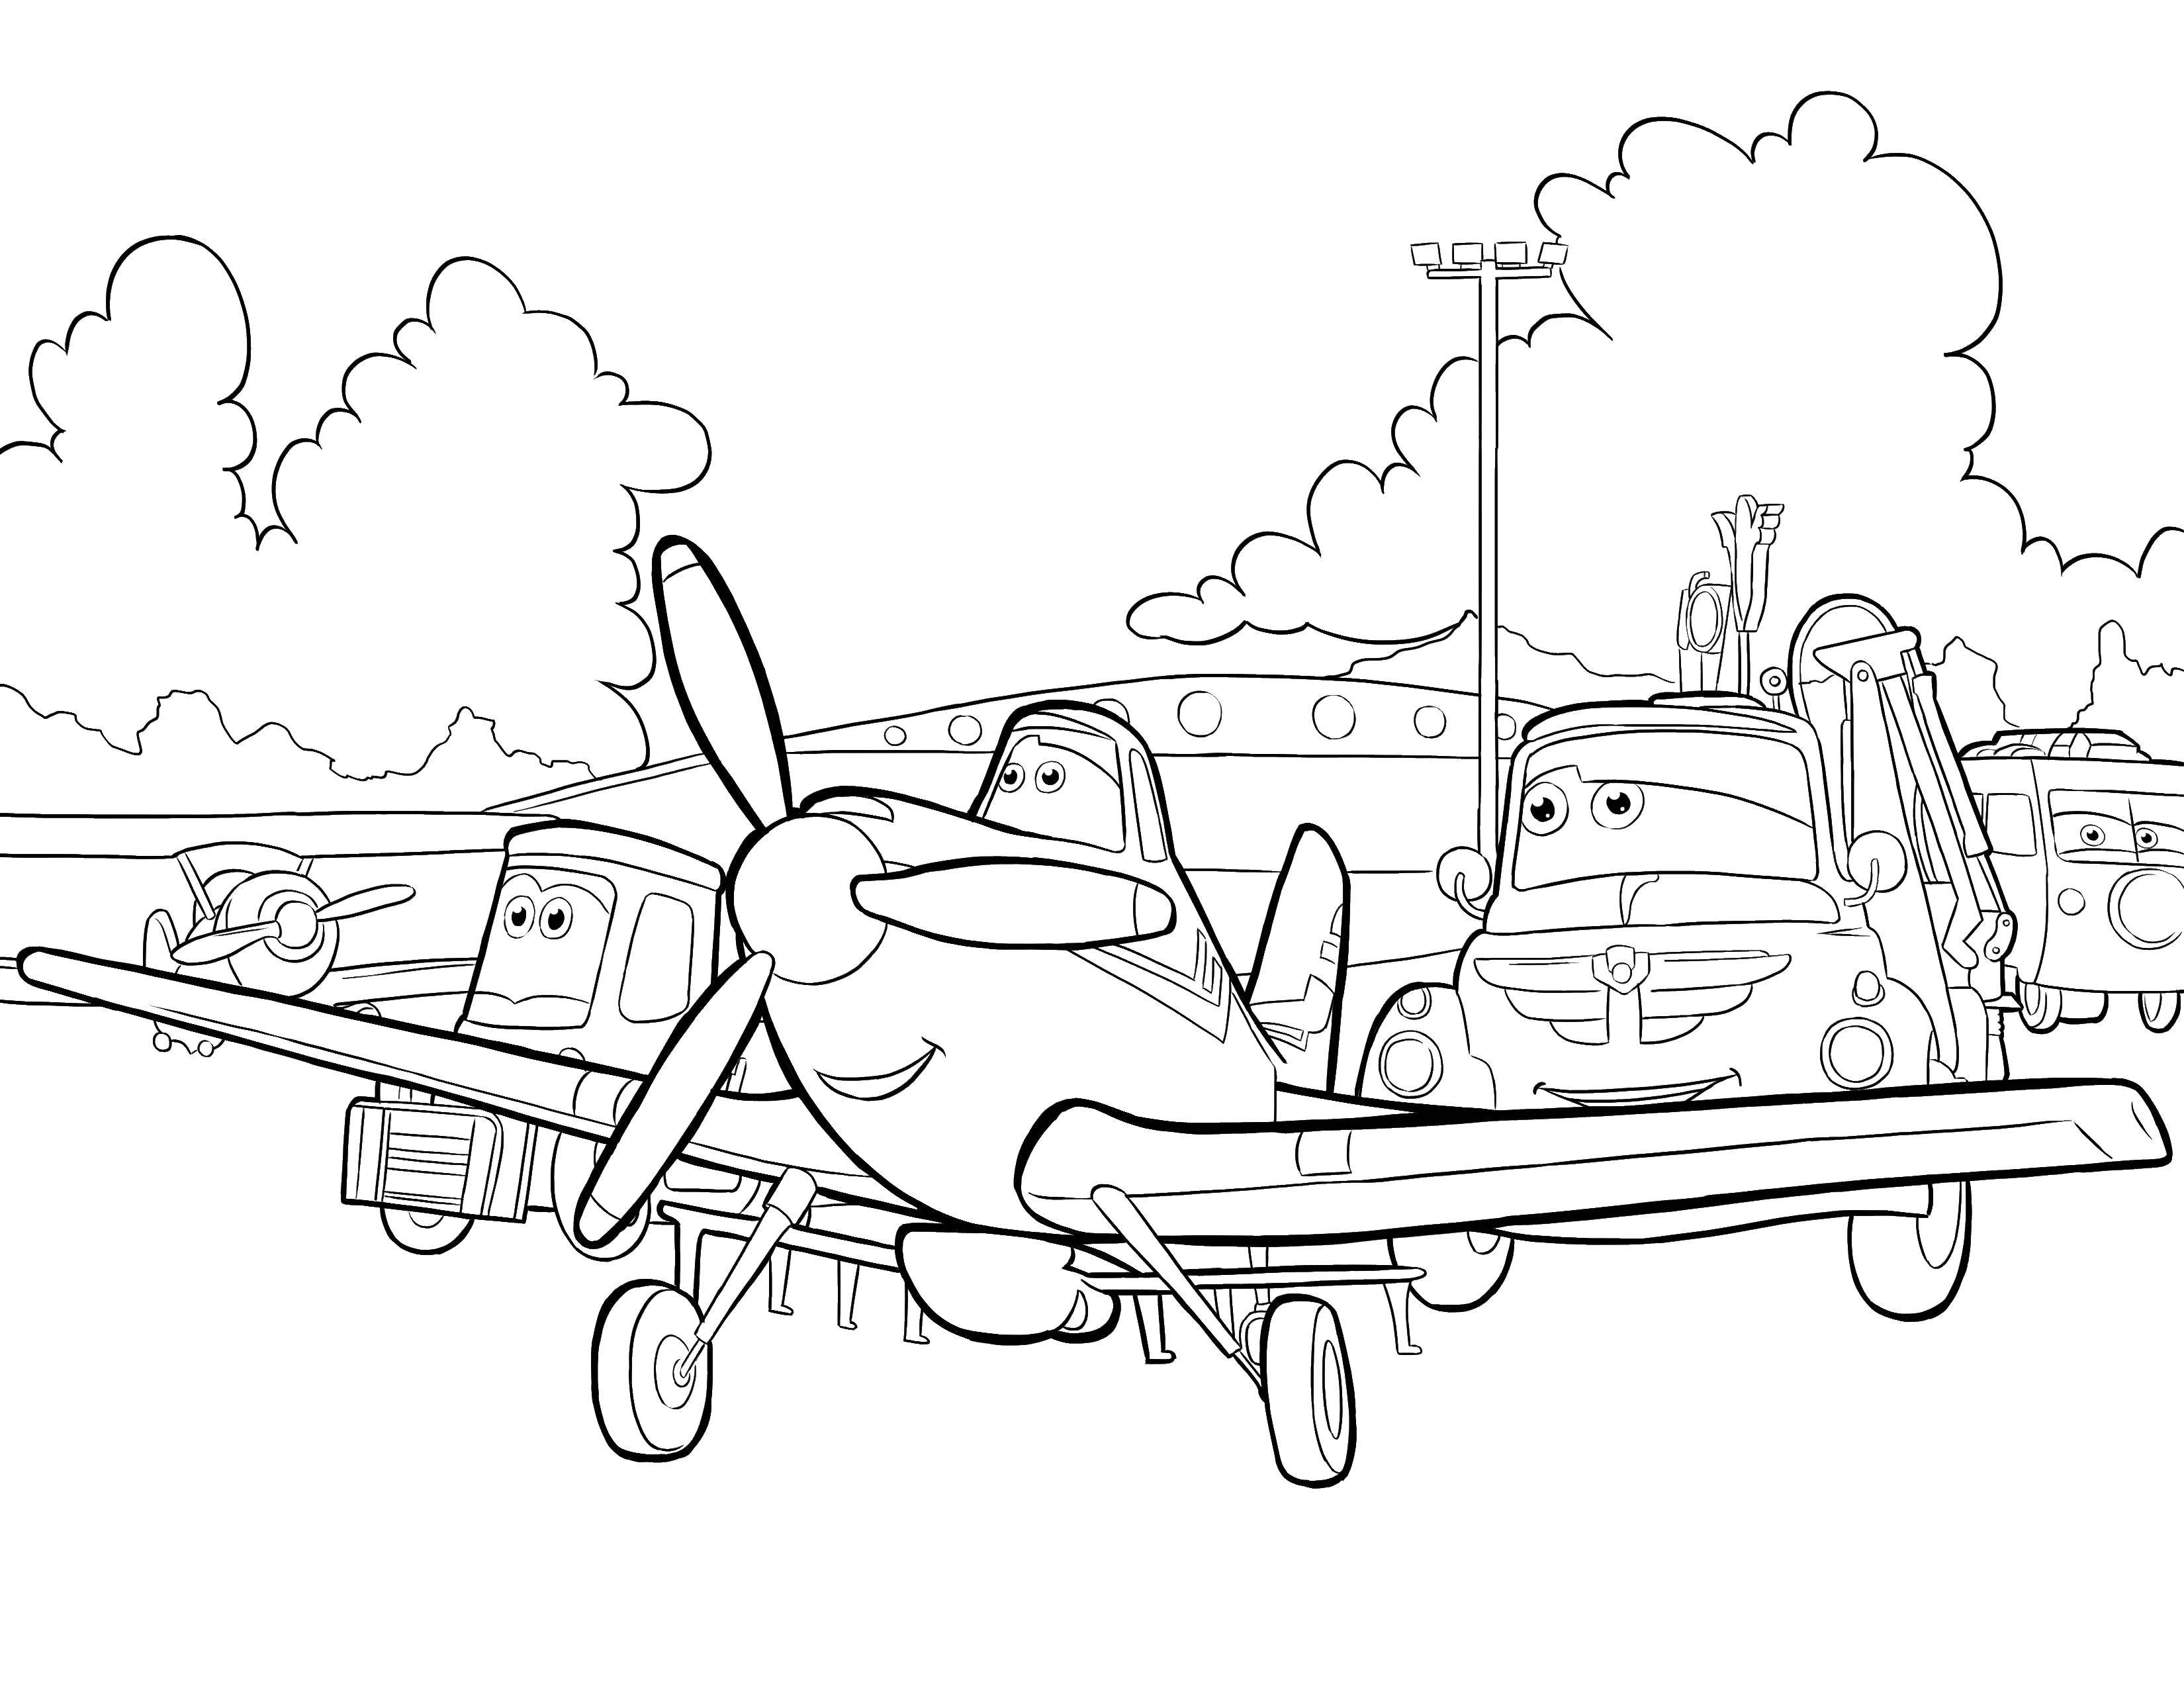 Coloring Dusty the plane on takeoff. Category The planes. Tags:  The Plane, Dusty.